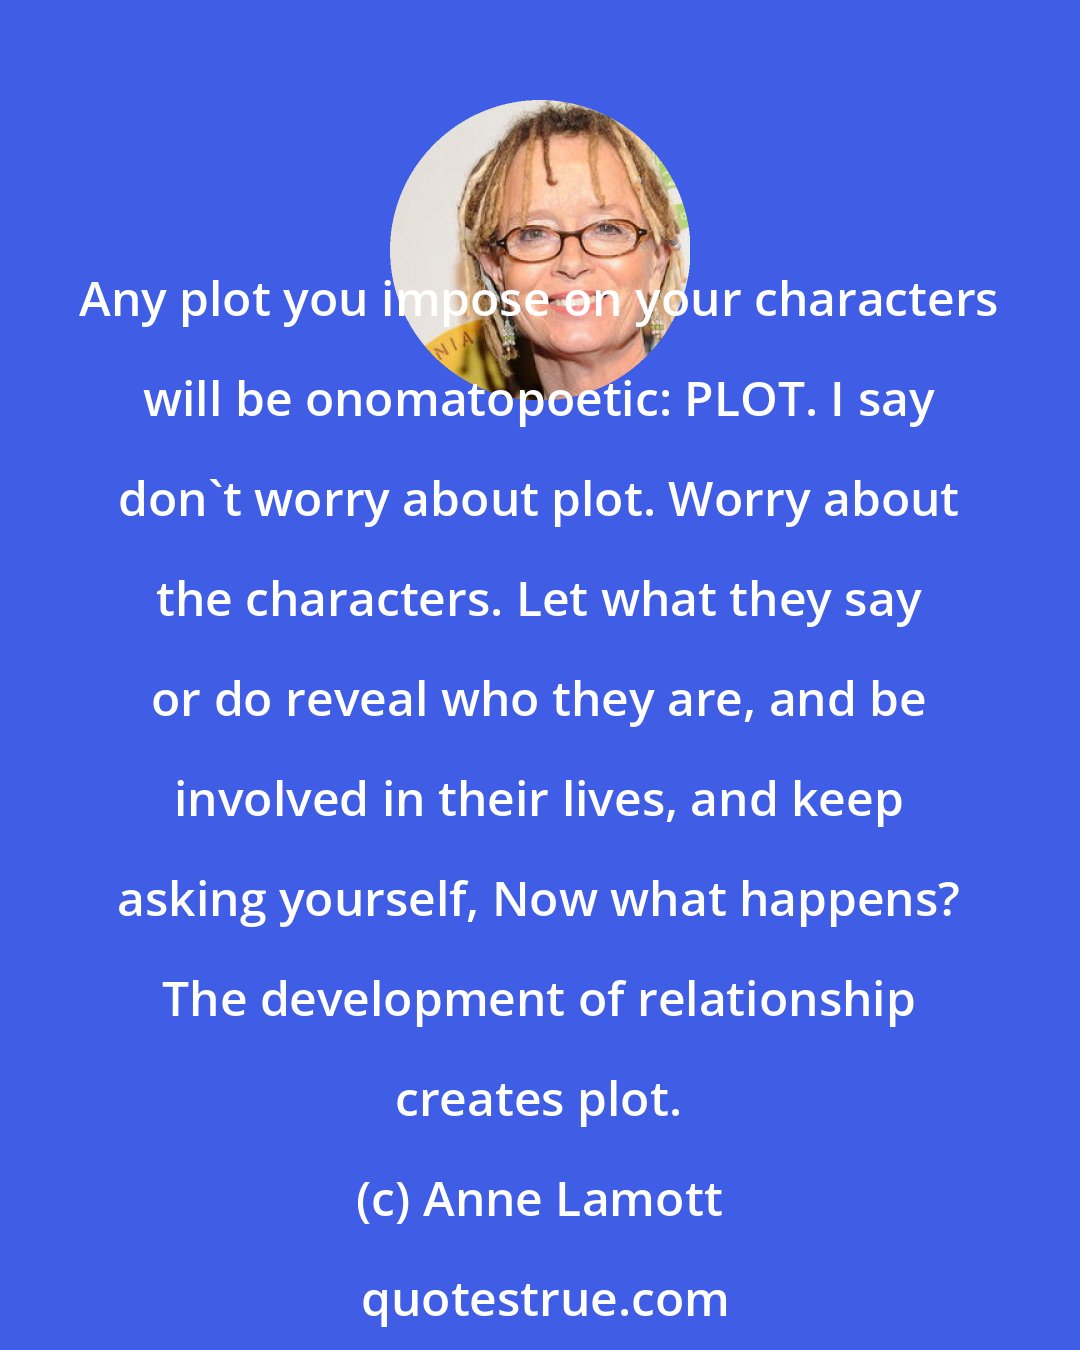 Anne Lamott: Any plot you impose on your characters will be onomatopoetic: PLOT. I say don't worry about plot. Worry about the characters. Let what they say or do reveal who they are, and be involved in their lives, and keep asking yourself, Now what happens? The development of relationship creates plot.